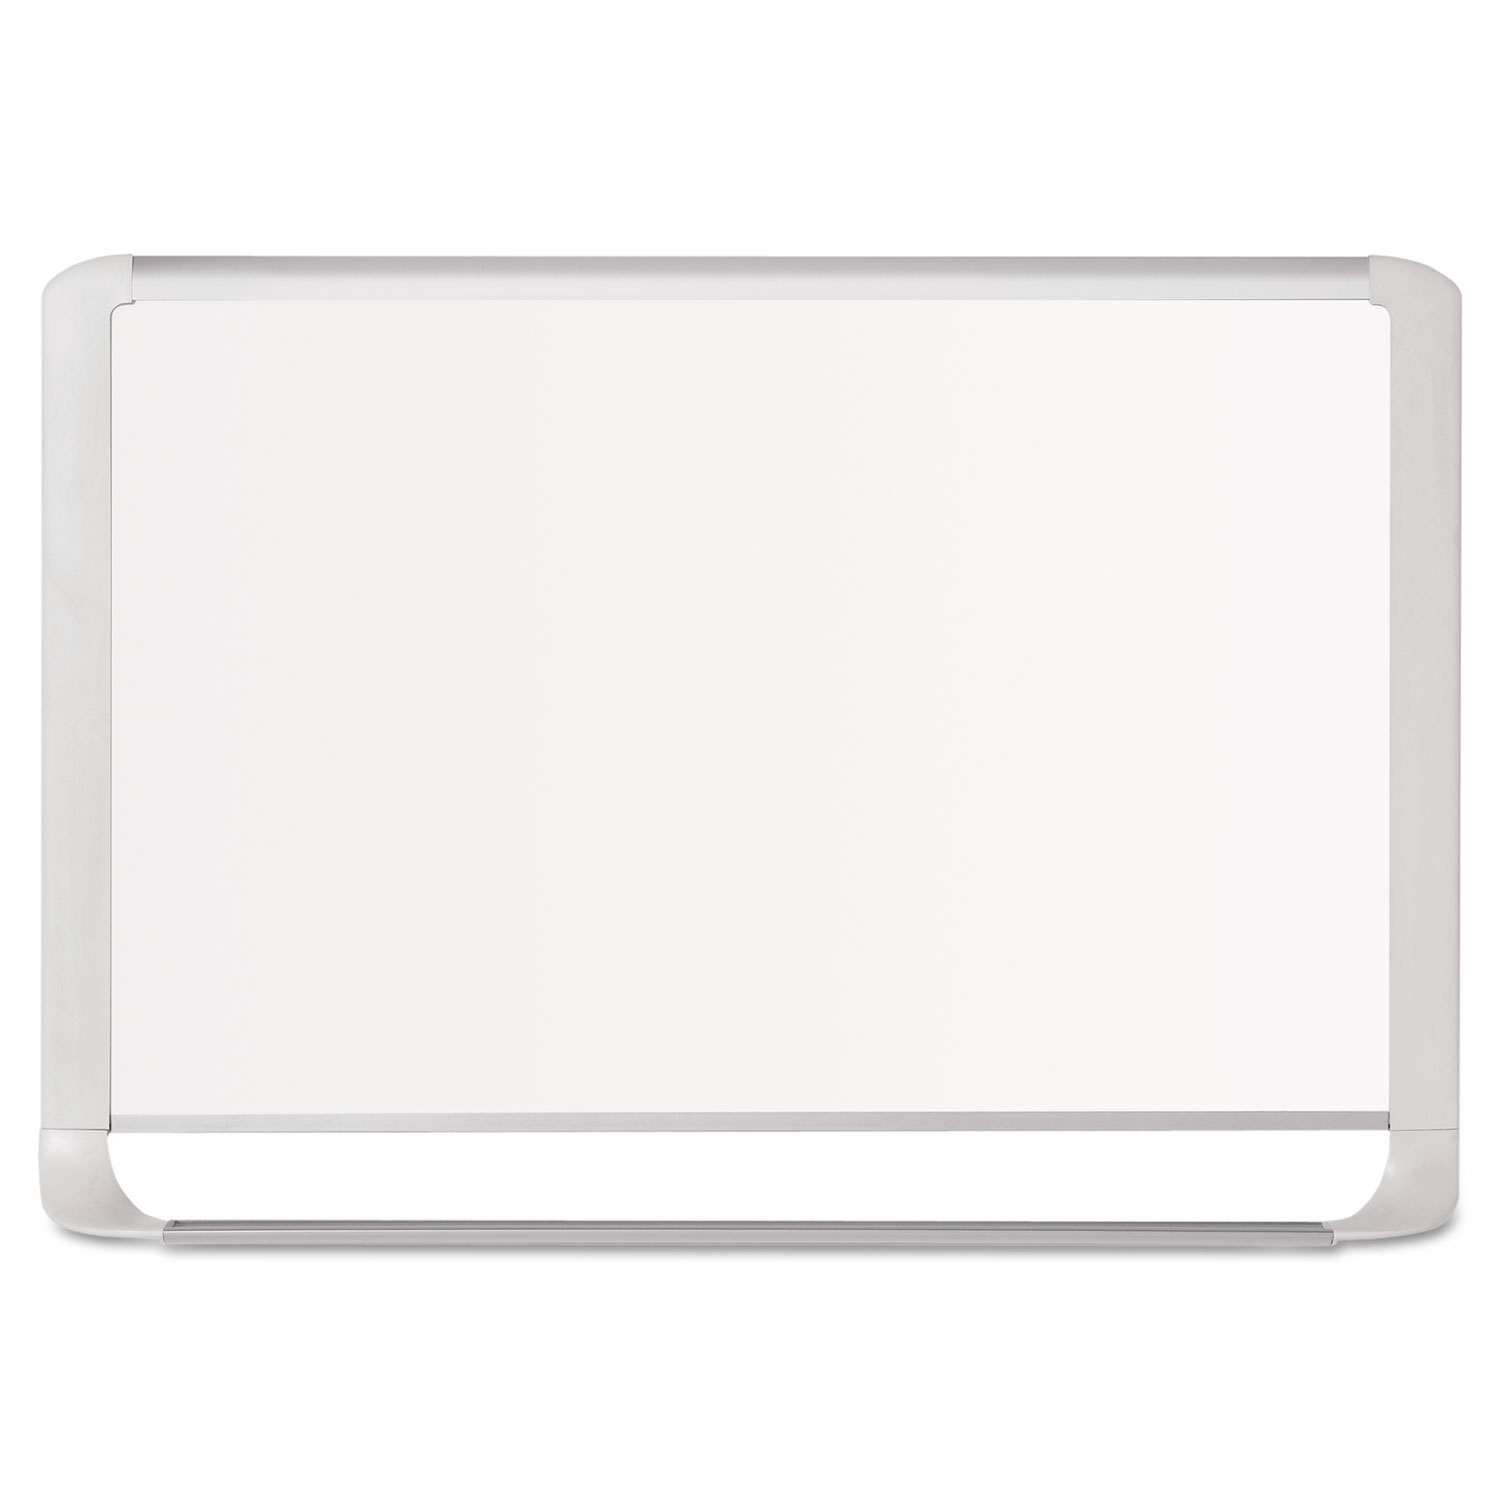  MasterVision MVI210205 Lacquered steel magnetic dry erase board, 48 x 96, Silver/White (BVCMVI210205) 